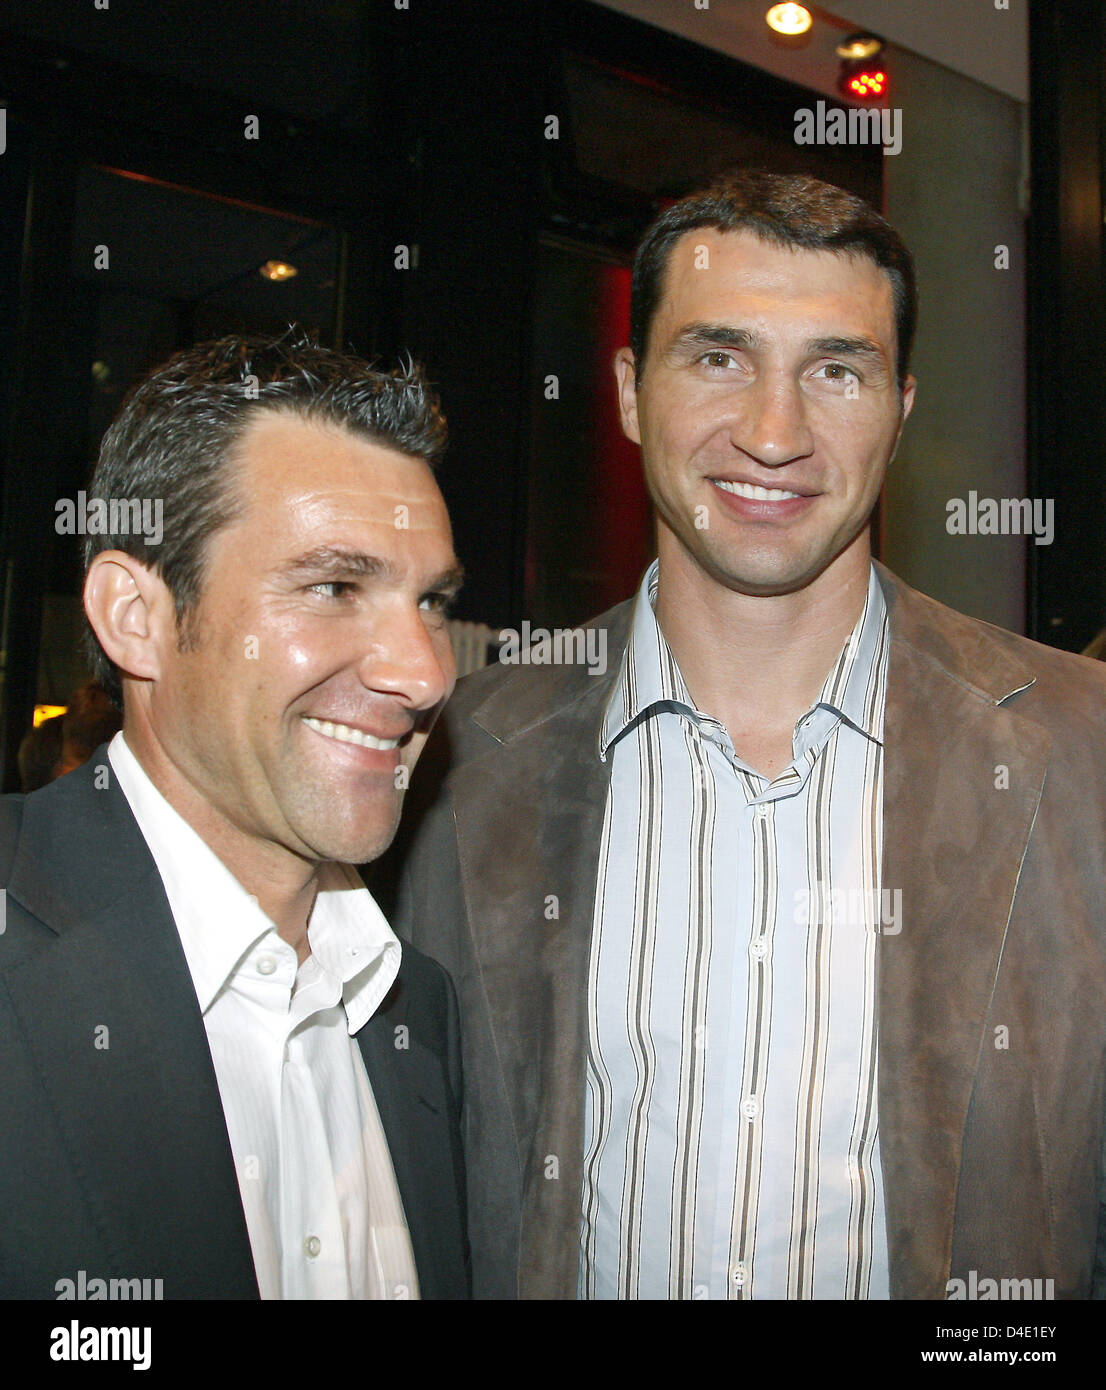 Holder of the WBO heavyweight title Vladimir Klitschko (R) and Carl-Uwe Steeb, director of the ATP Masters Series, are pictured during the red carpet event at 'Copper House' restaurant in Hamburg, Germany, 14 May 2008. Participants of the tennis tournament celebrated together with the high society and prominent persons of commercial and political circles. Photo: MARCUS BRANDT Stock Photo